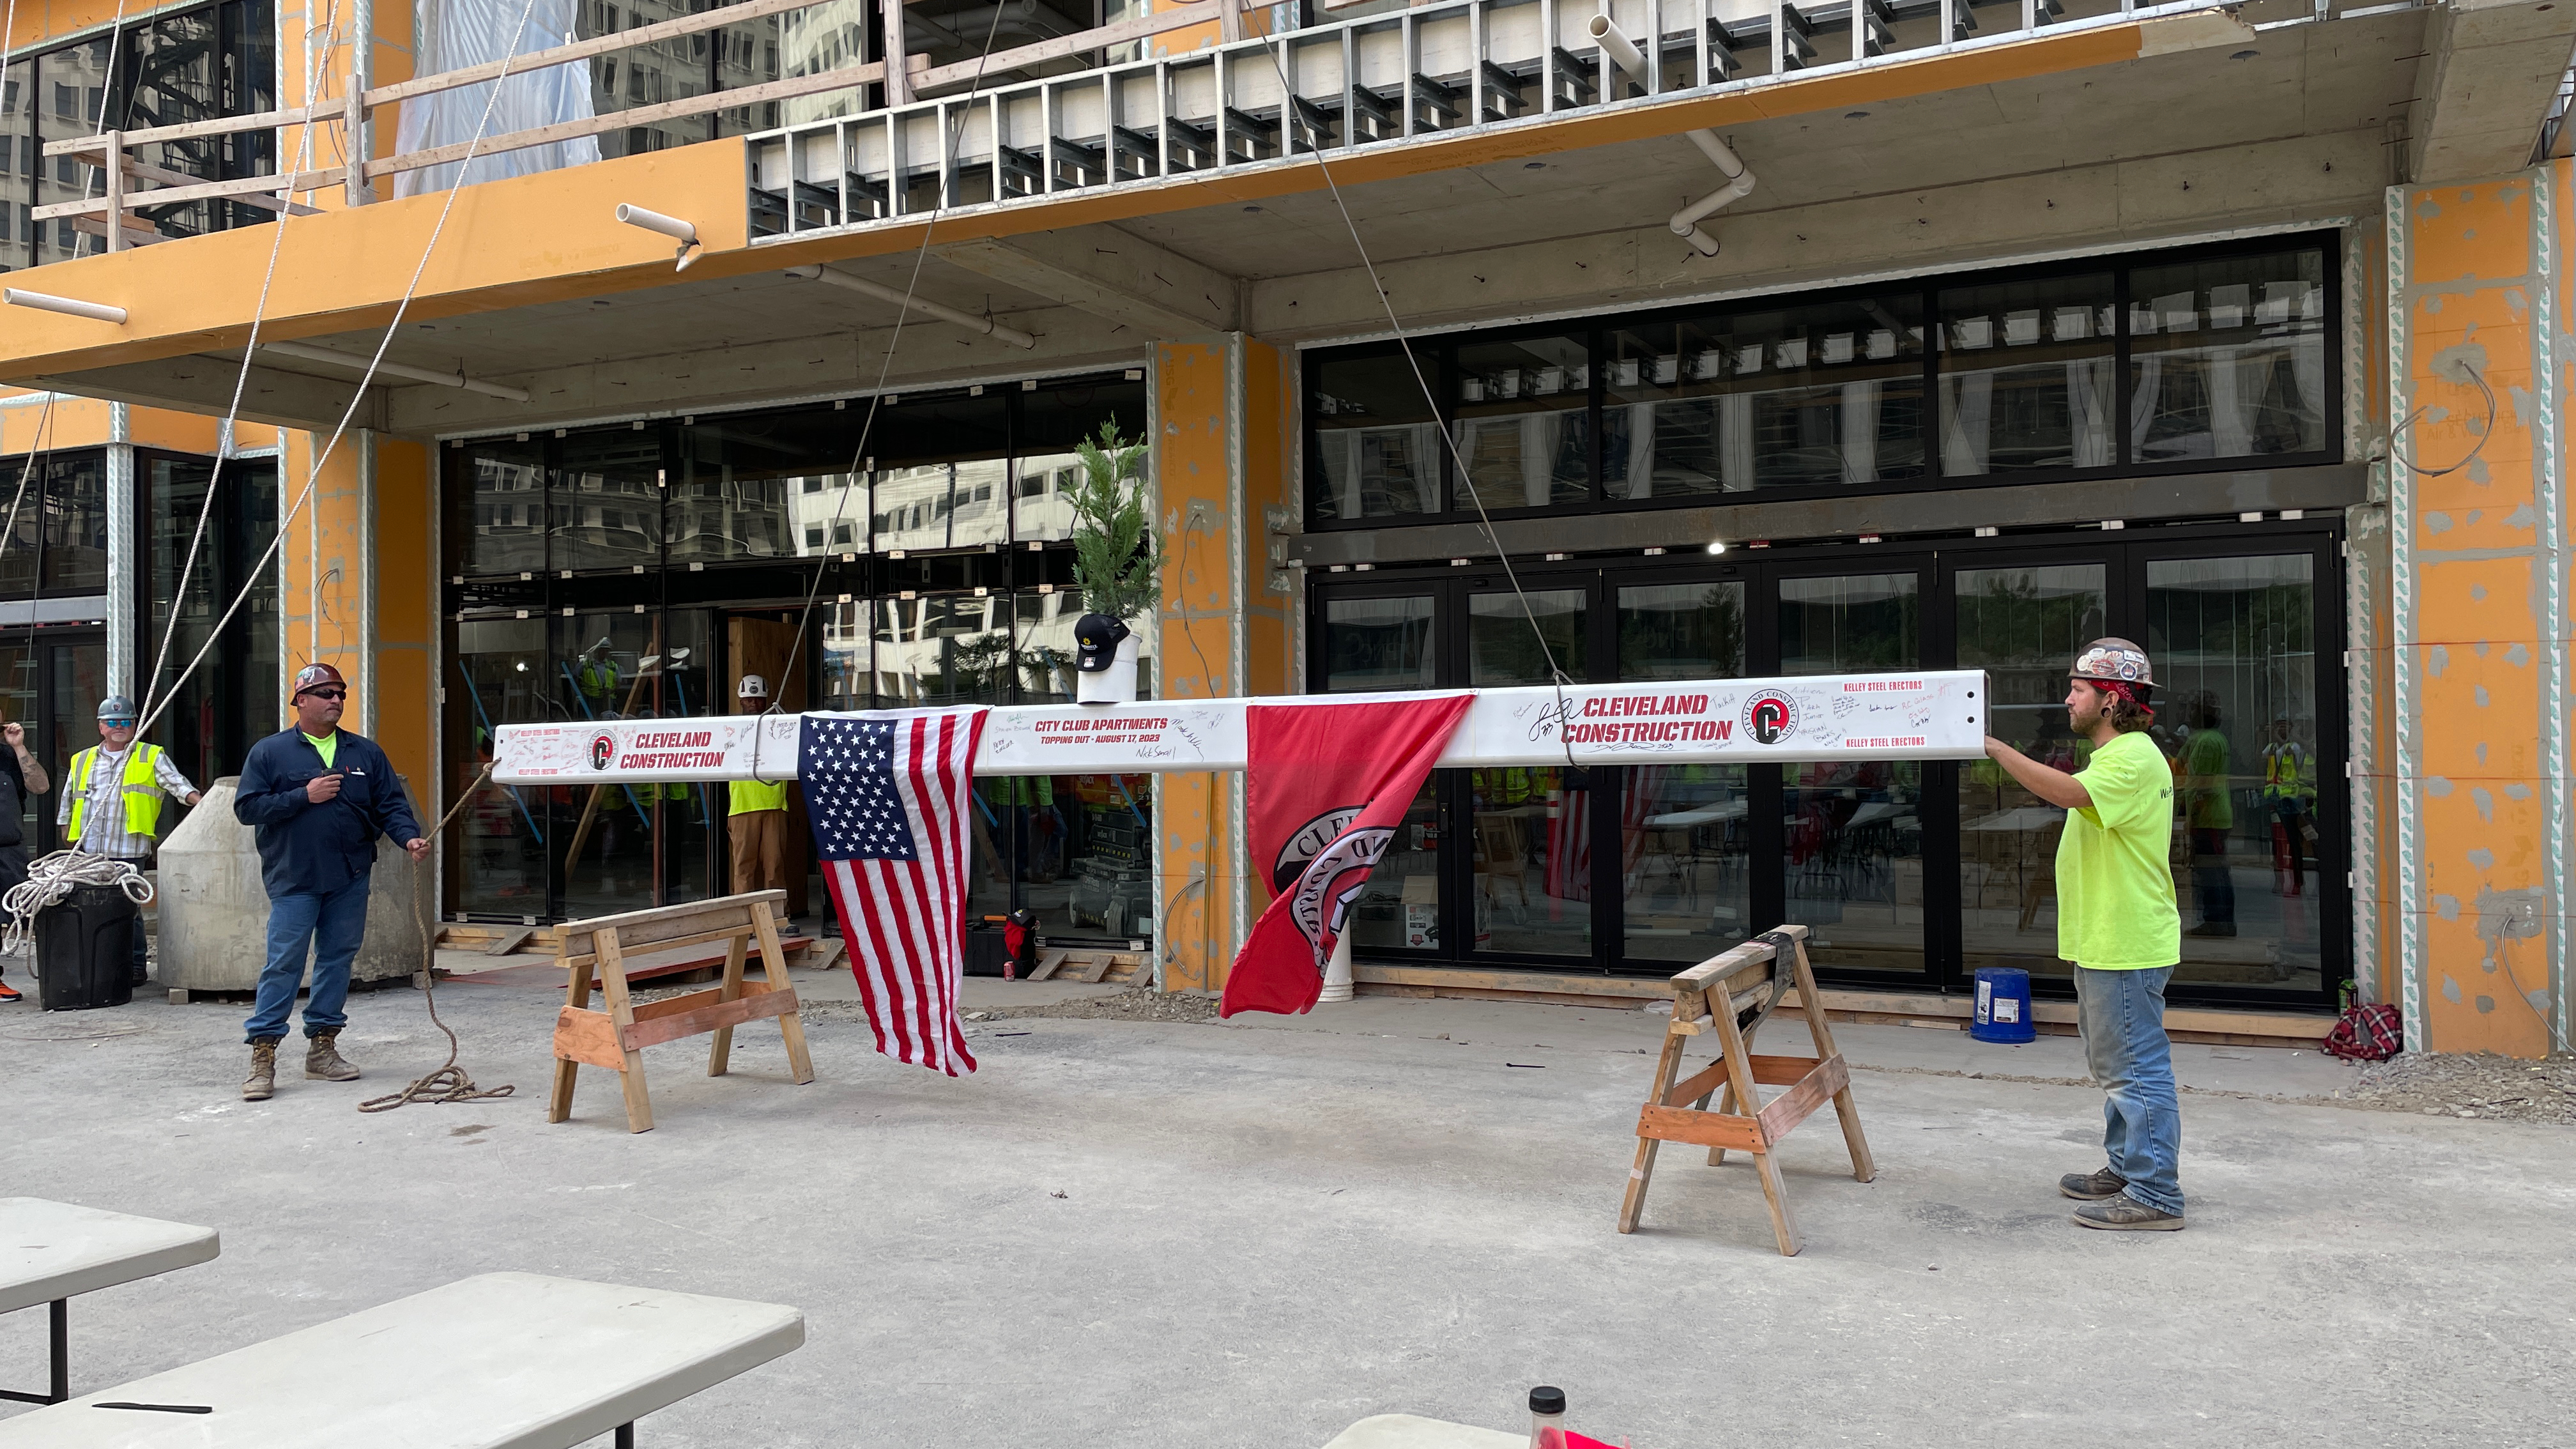 City Club Apartments Cleveland Celebrates Topping Out Construction Milestone